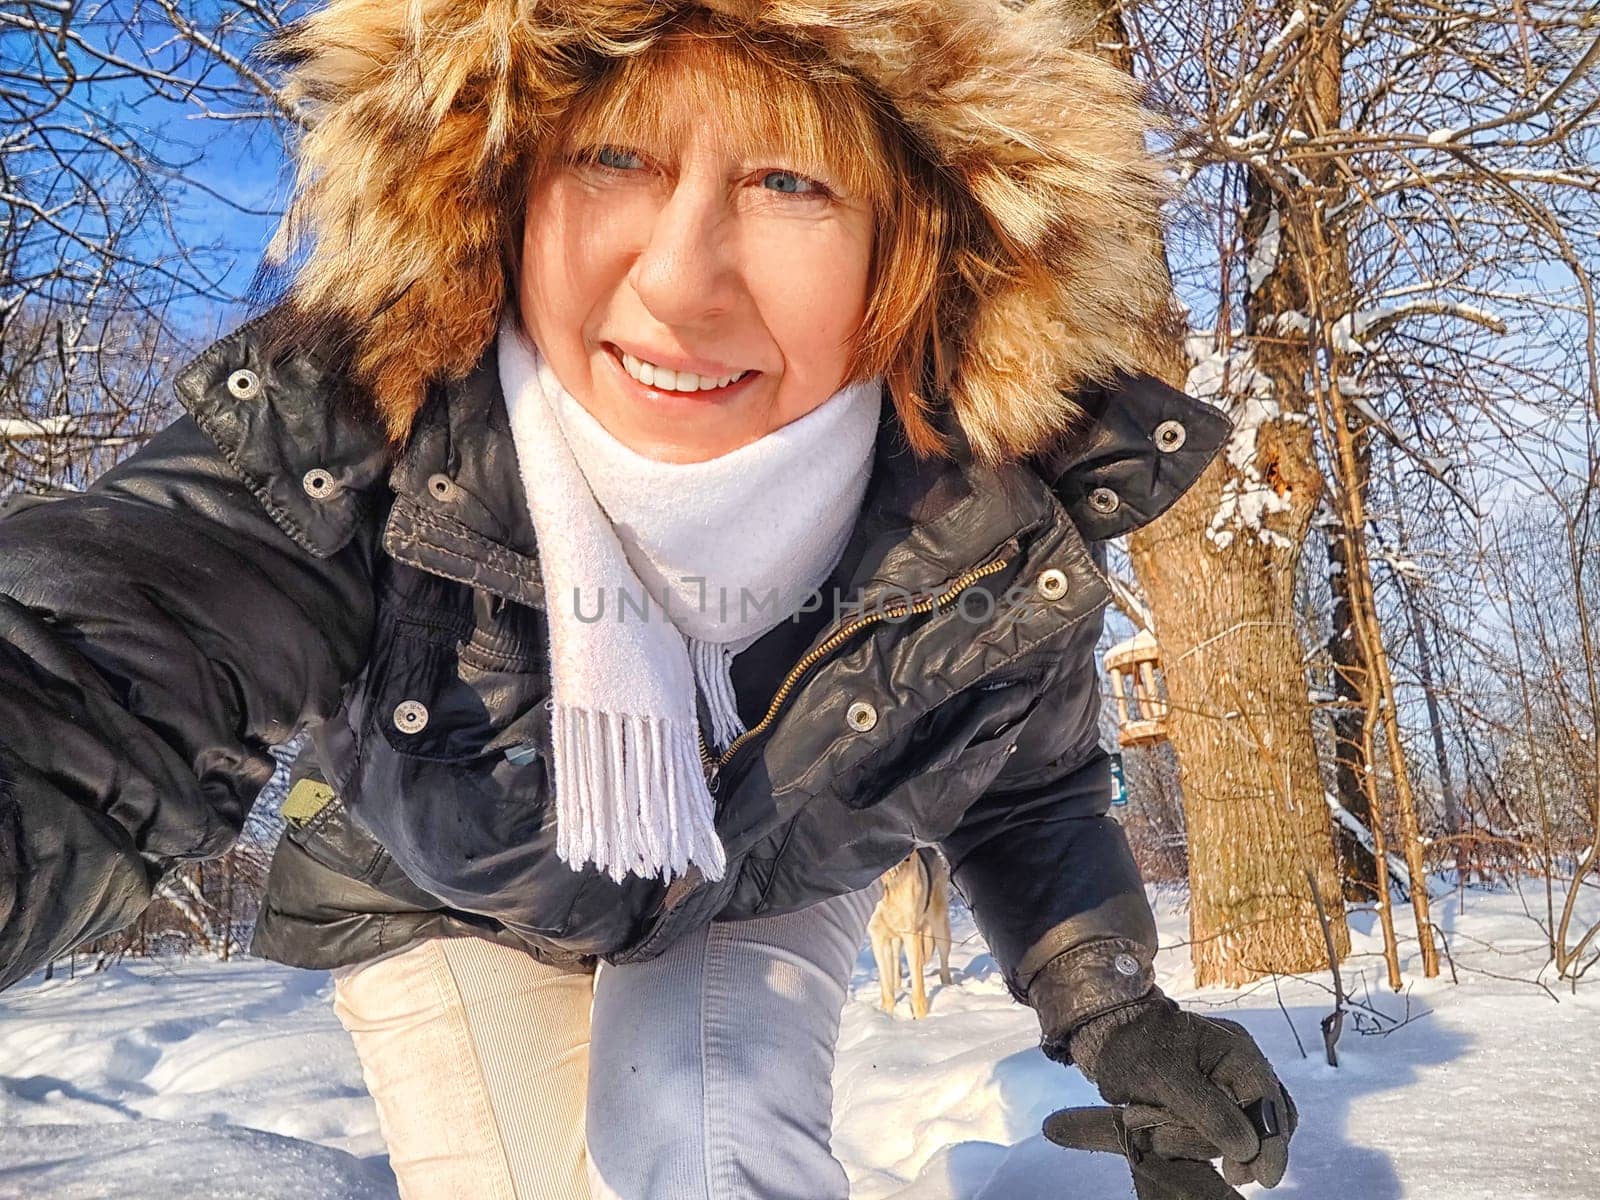 A cheerful middle aged woman in a winter coat with fur, scarf taking selfie on nature outdoors and cold, snowy background with blue sky and white clouds